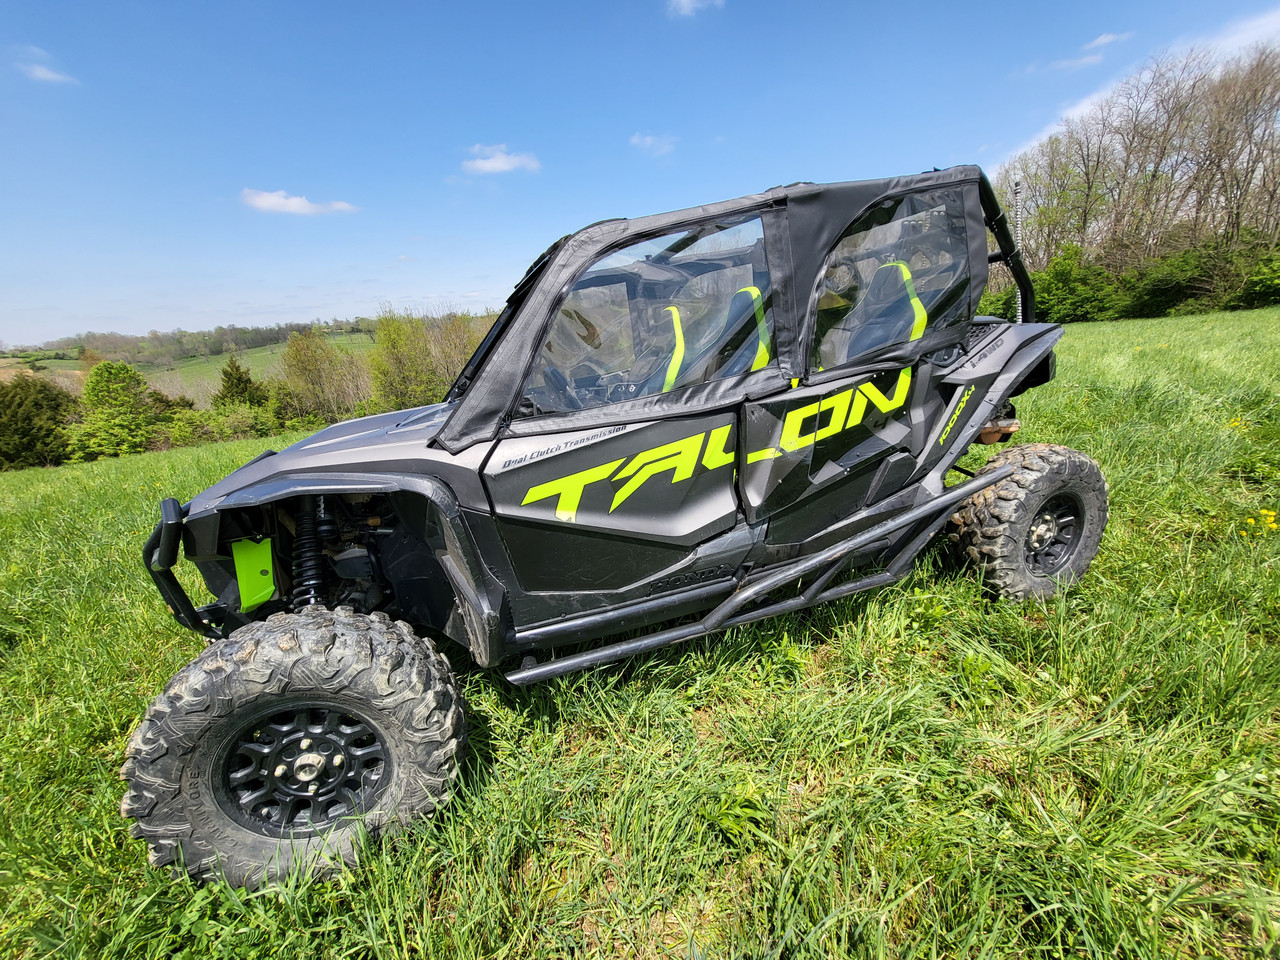 3 Star side x side Honda Talon 1000-4 upper doors and rear window side and front angle view